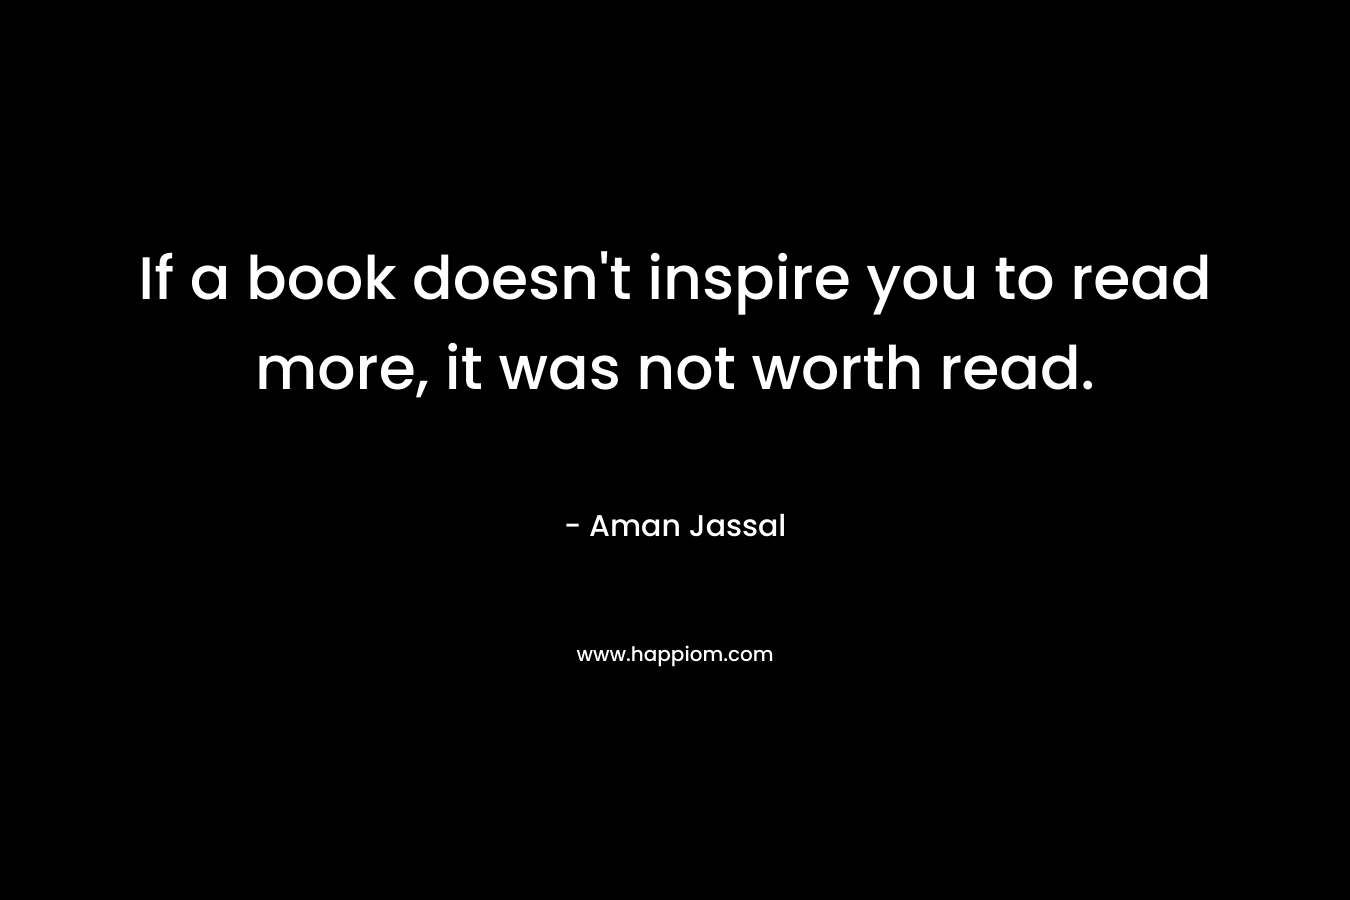 If a book doesn’t inspire you to read more, it was not worth read. – Aman Jassal